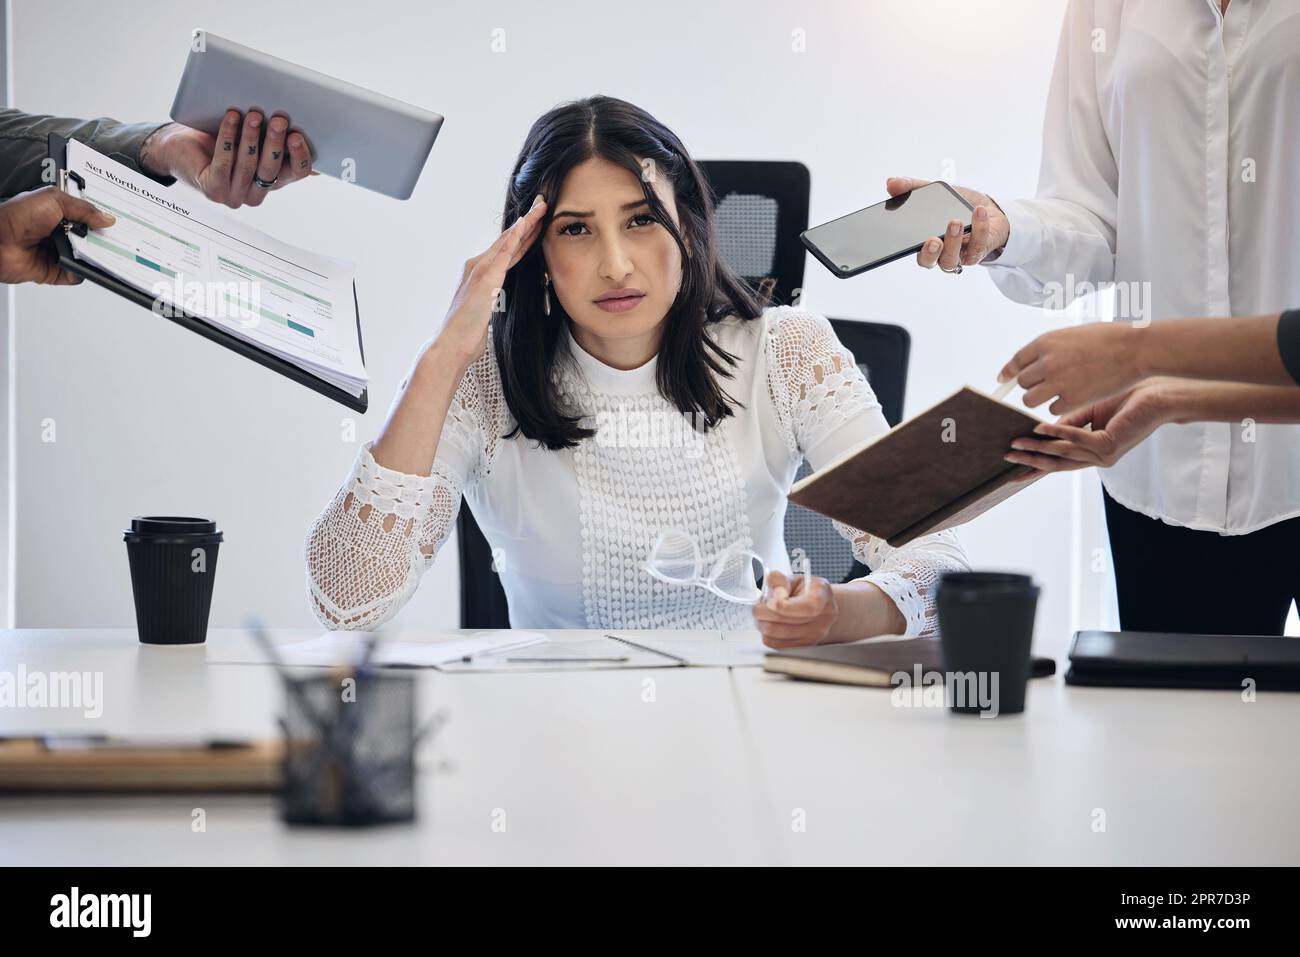 When can I leave. Shot of a young businesswoman looking stressed out in a demanding work environment. Stock Photo